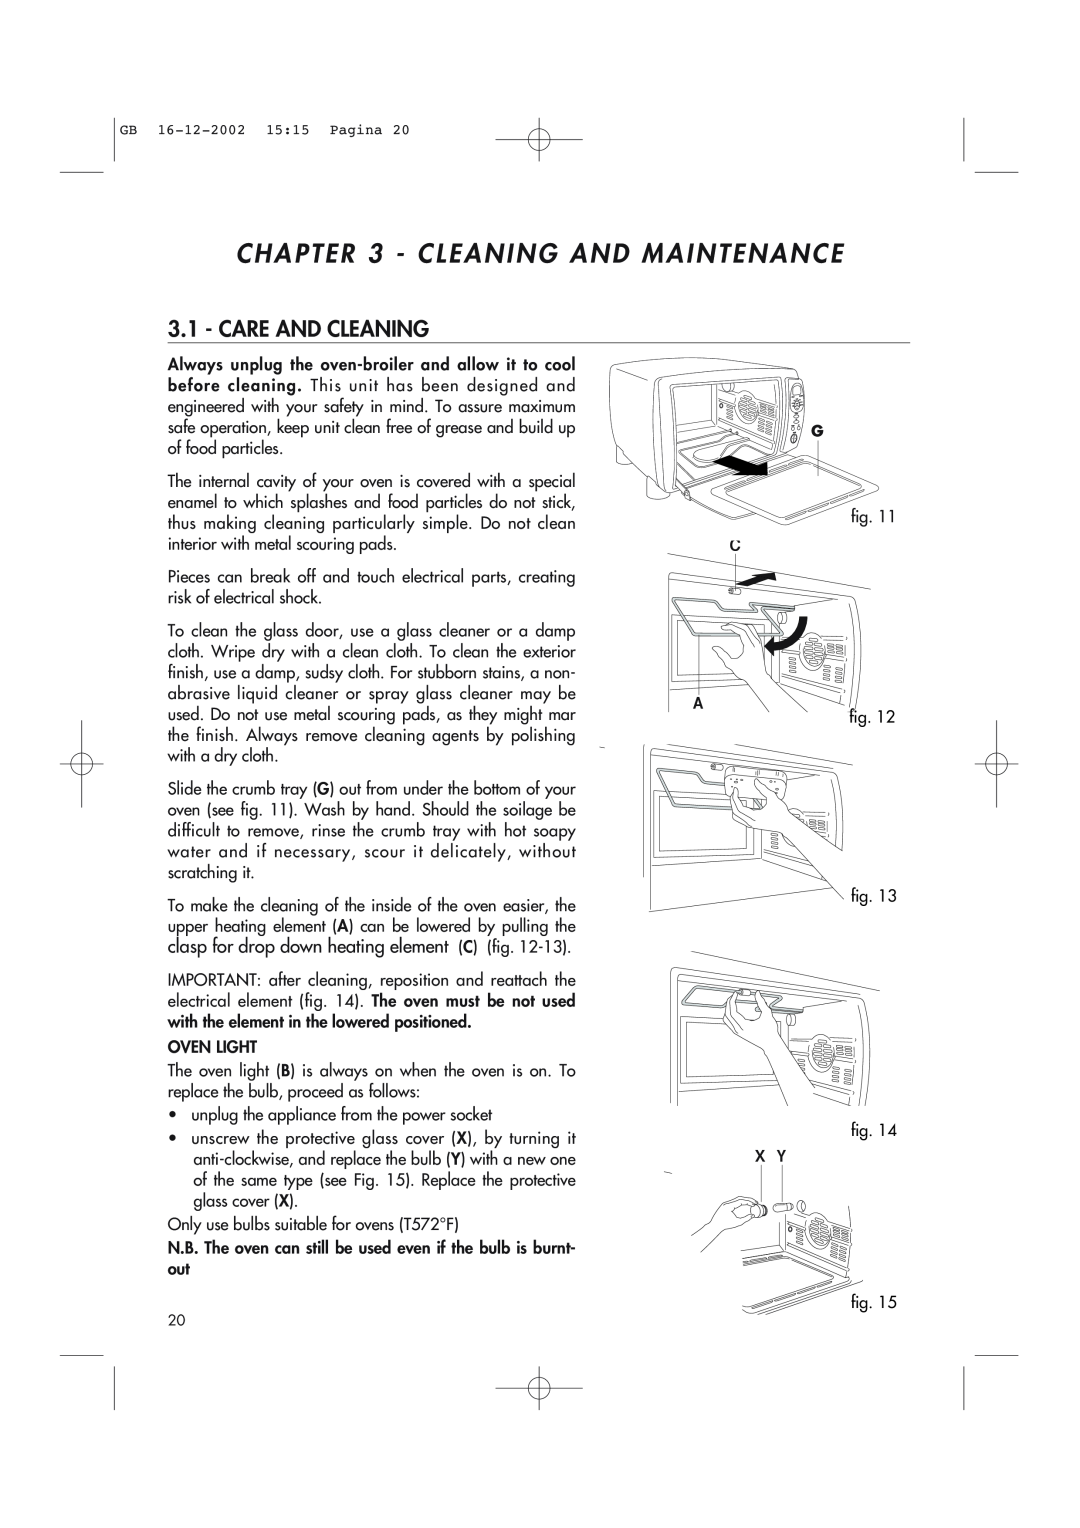 DeLonghi AD1099 manual Cleaning And Maintenance, Care And Cleaning 